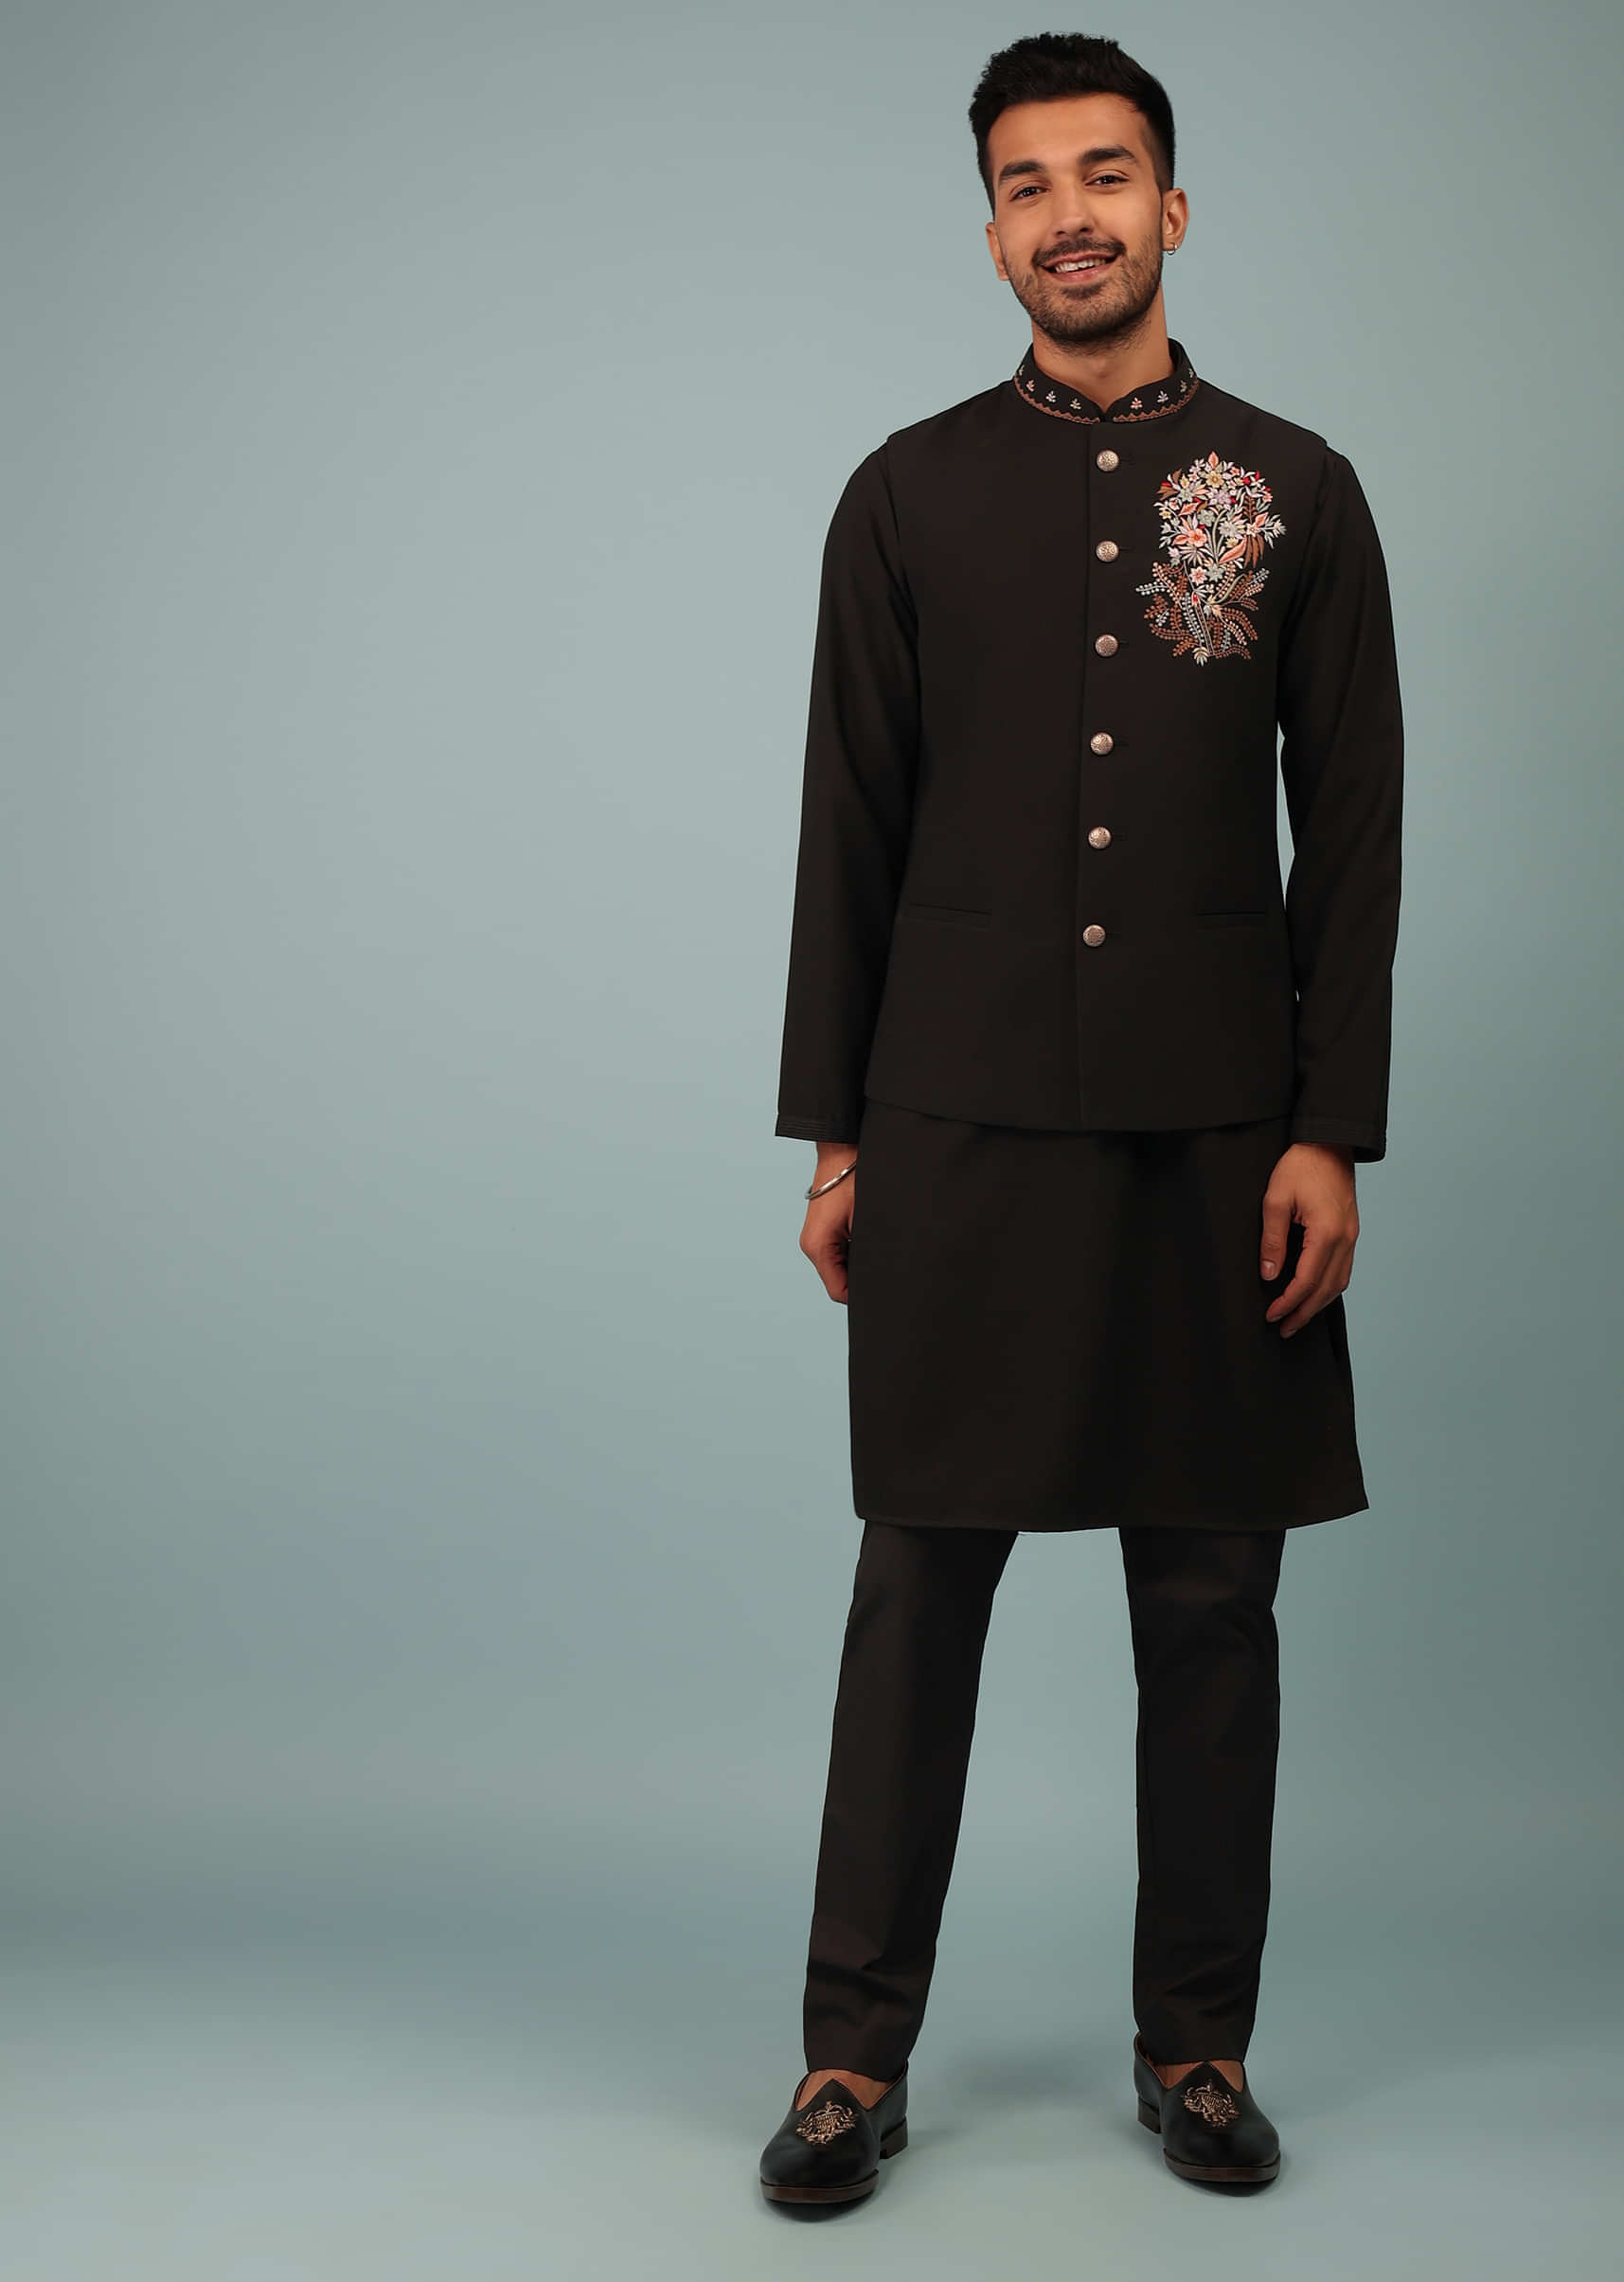 Black Bandi Jacket Set In Handloom Poly Wool With Multicolor Floral Butti Embroidery